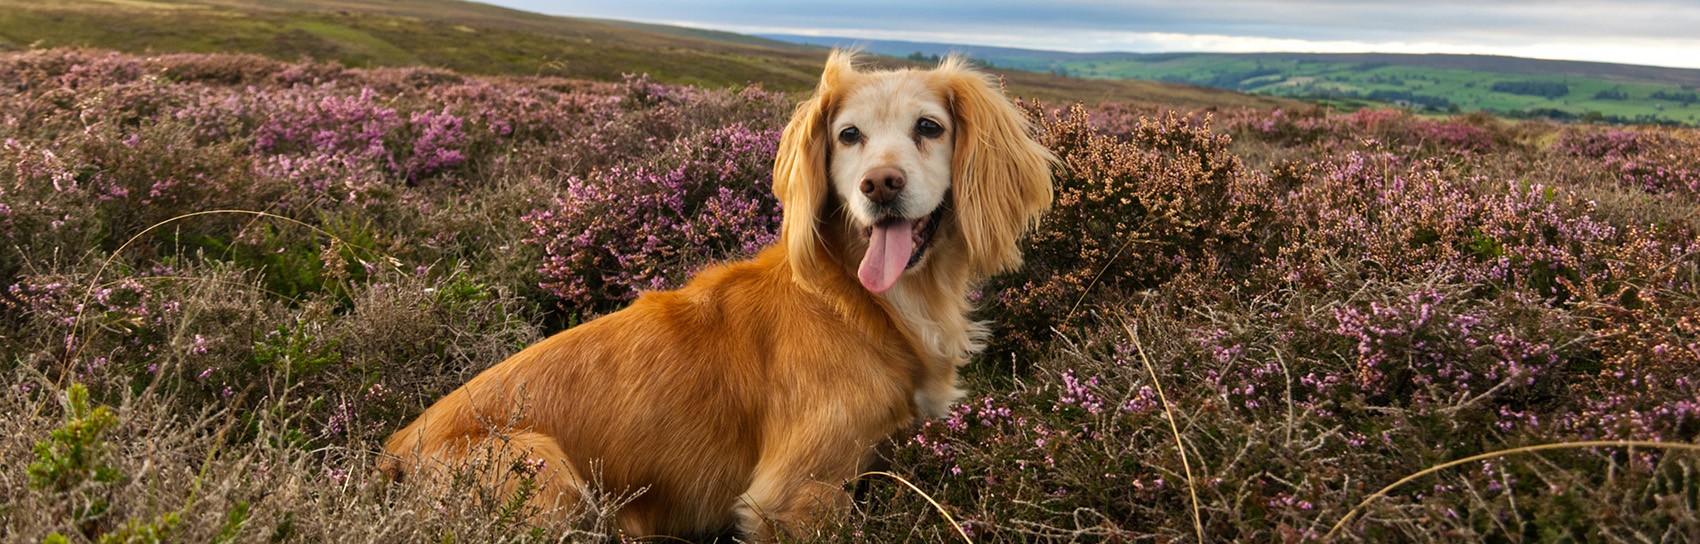 North York Moors Dog. Photograph by ANDY CARNE